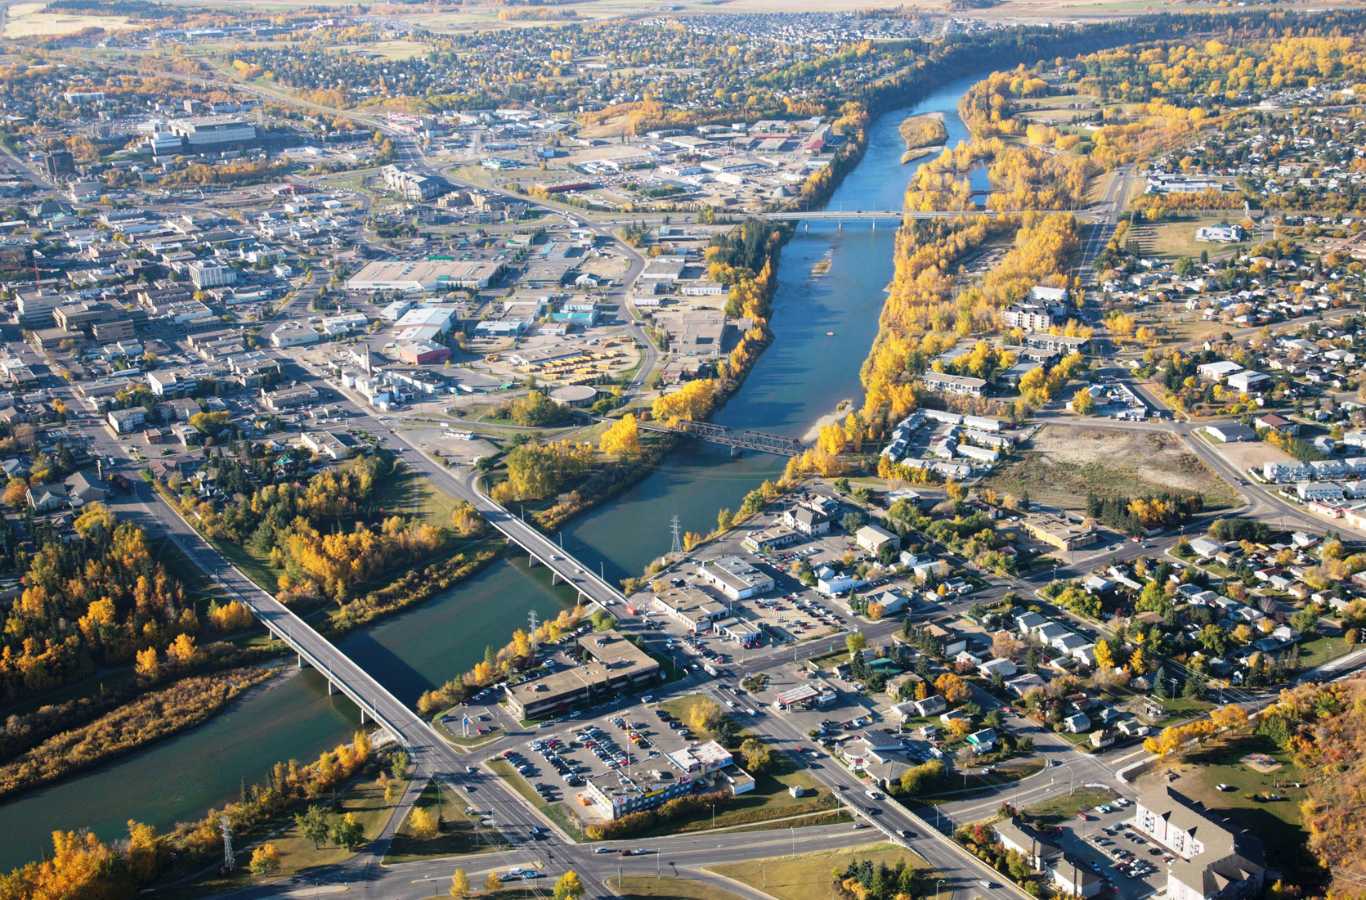 Scenic view of Red Deer, Alberta, highlighting the region served by Continental Realty & Management's property experts.